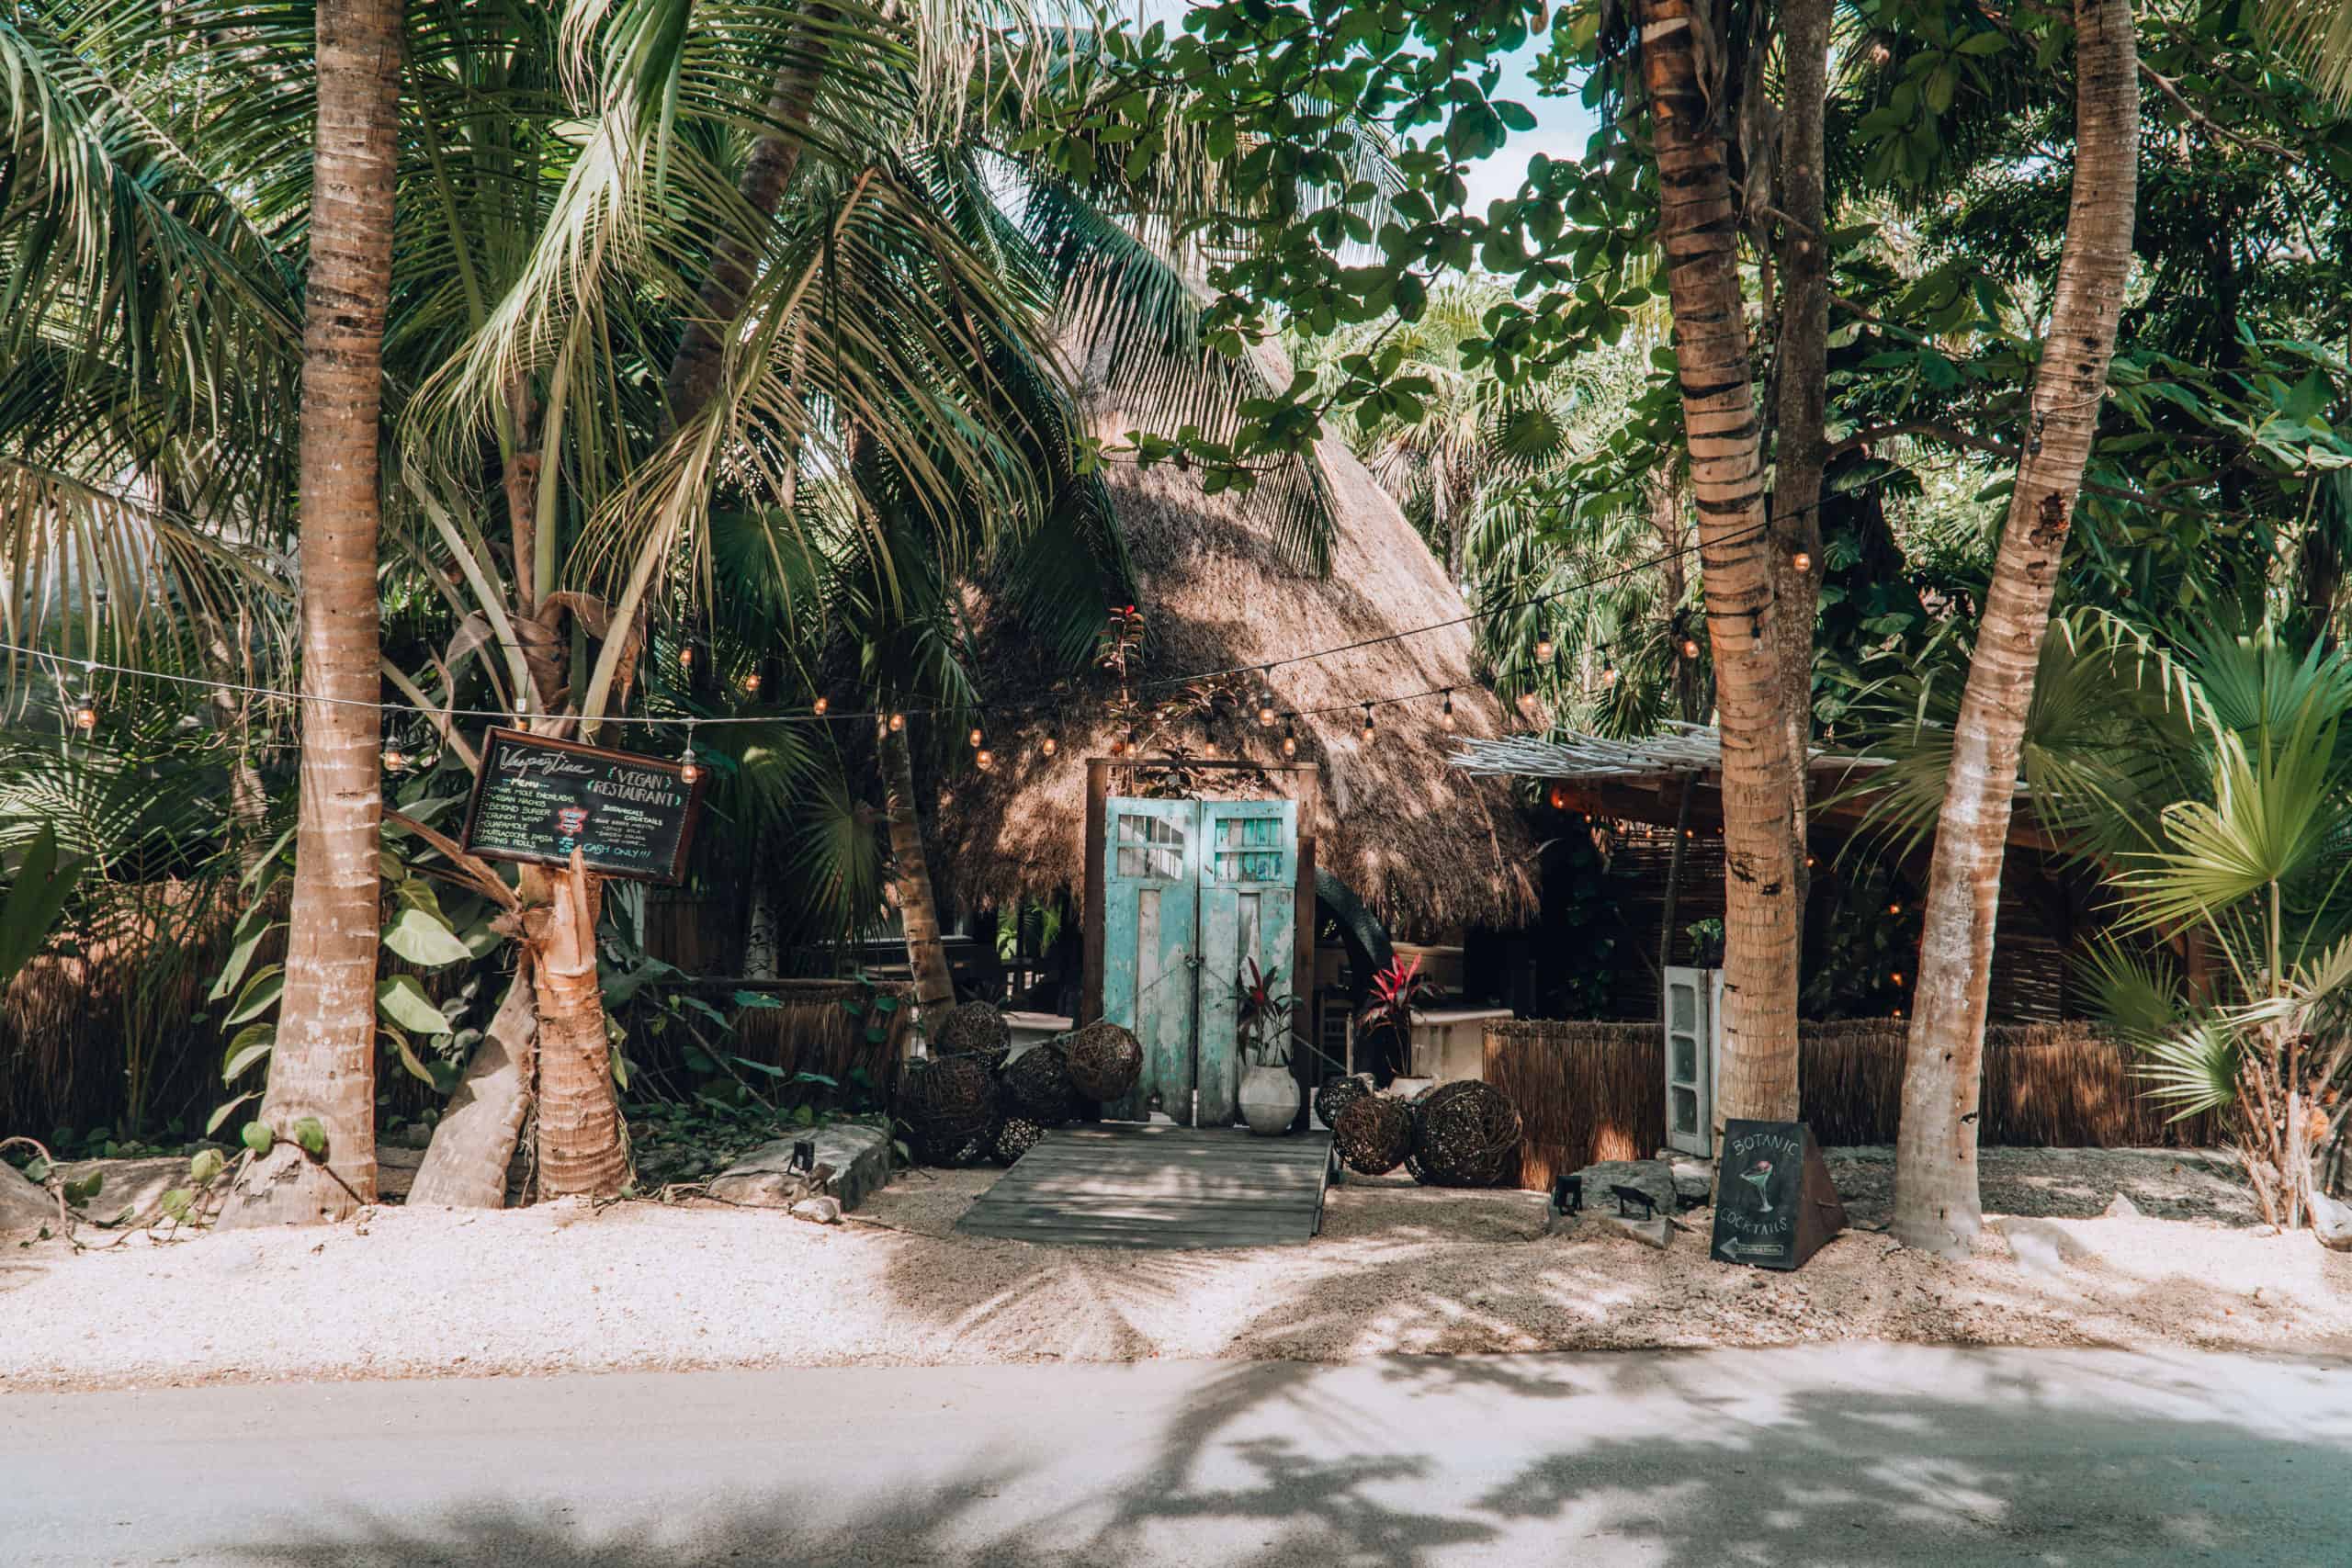 Cute shops and restaurants along the main Tulum beach road in Tulum, Mexico